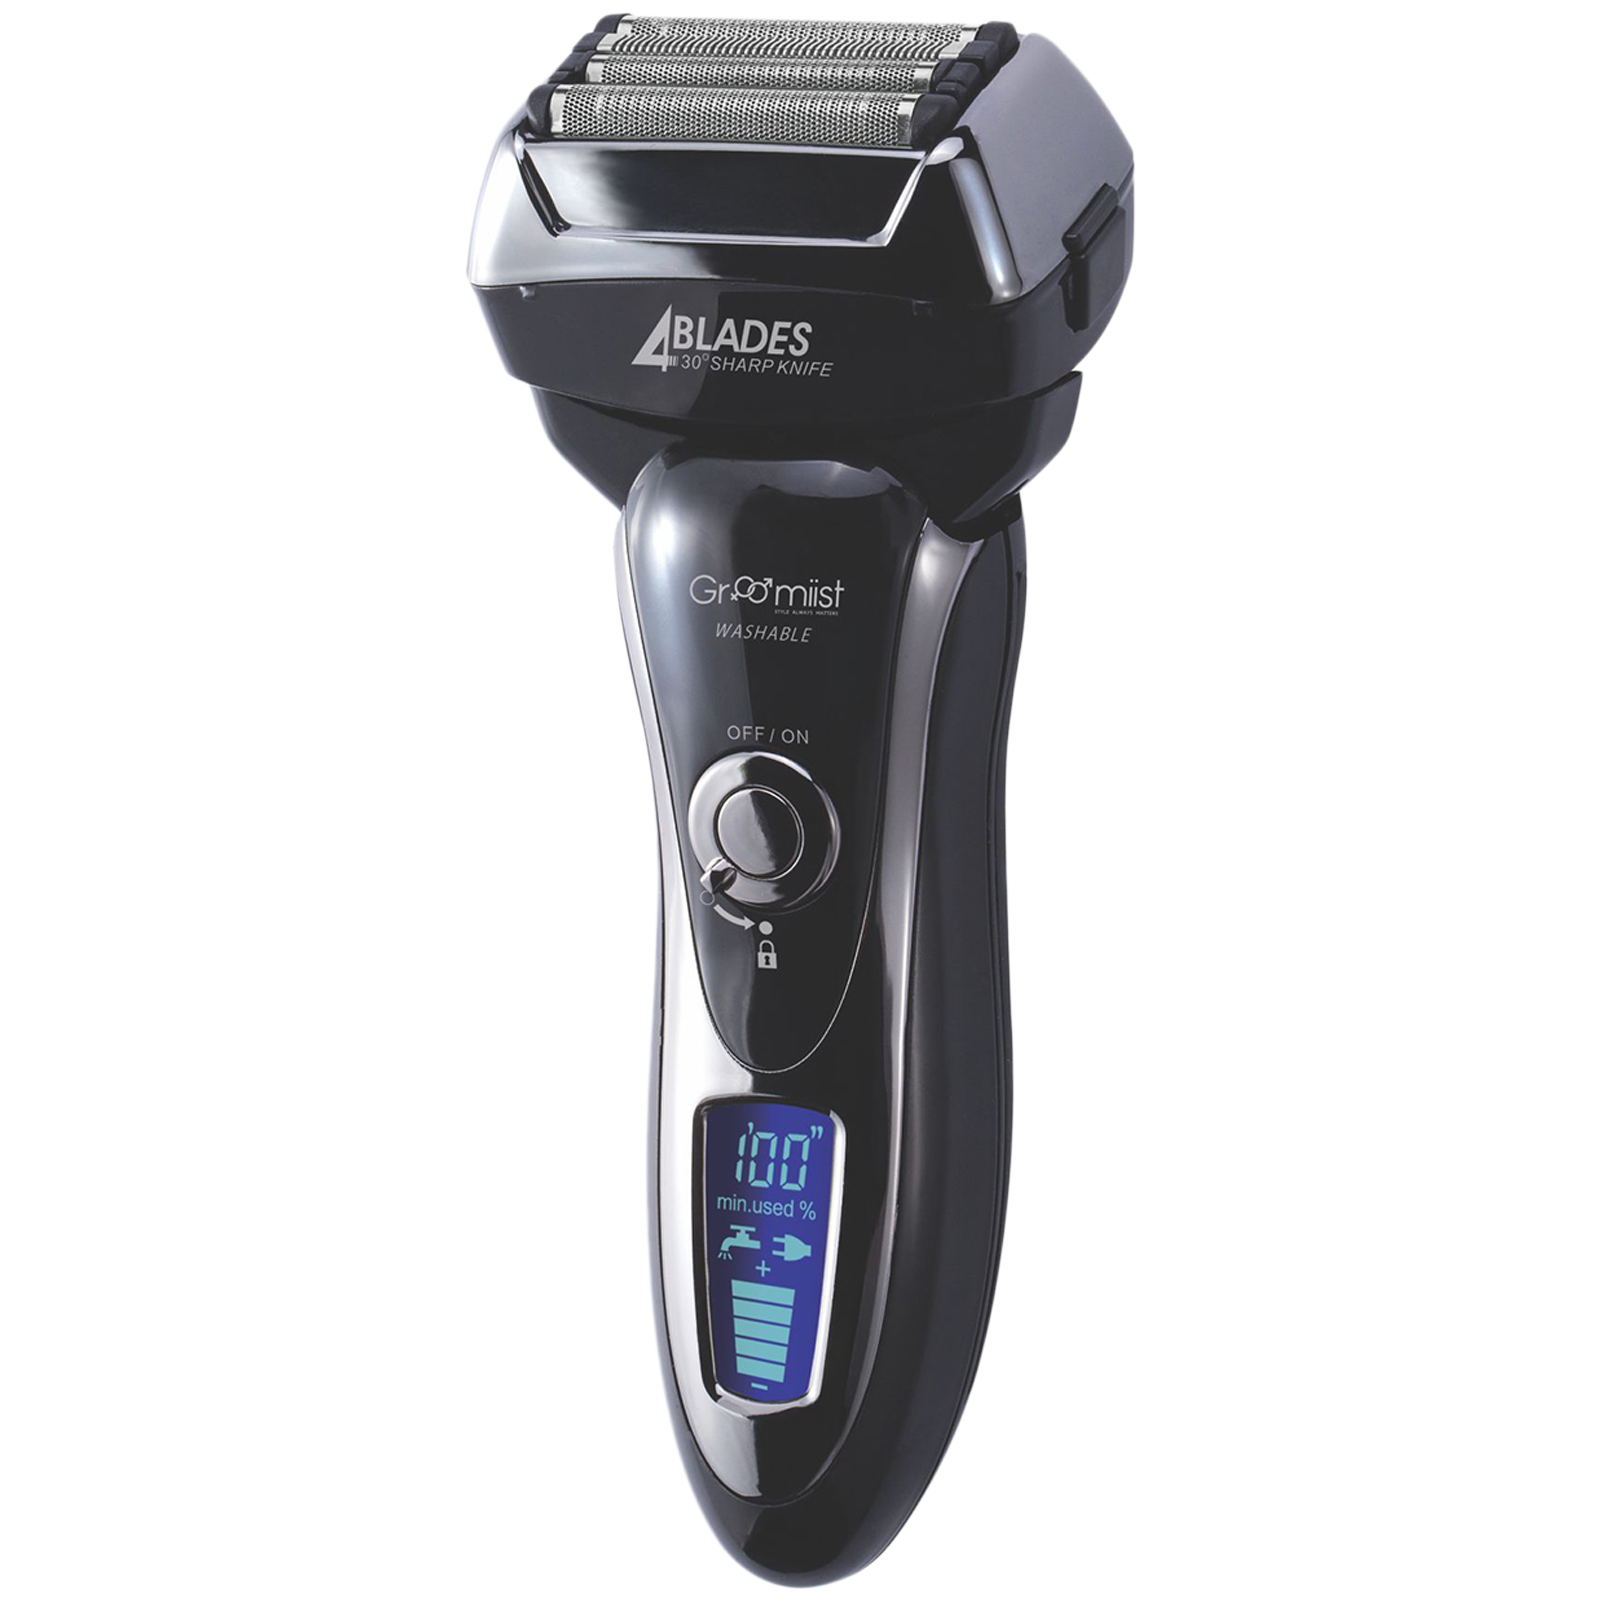 Groomiist Stainless Steel Blades Corded & Cordless Operation Wet and Dry Shaver (LCD Display, PS-33, Black and Silver)